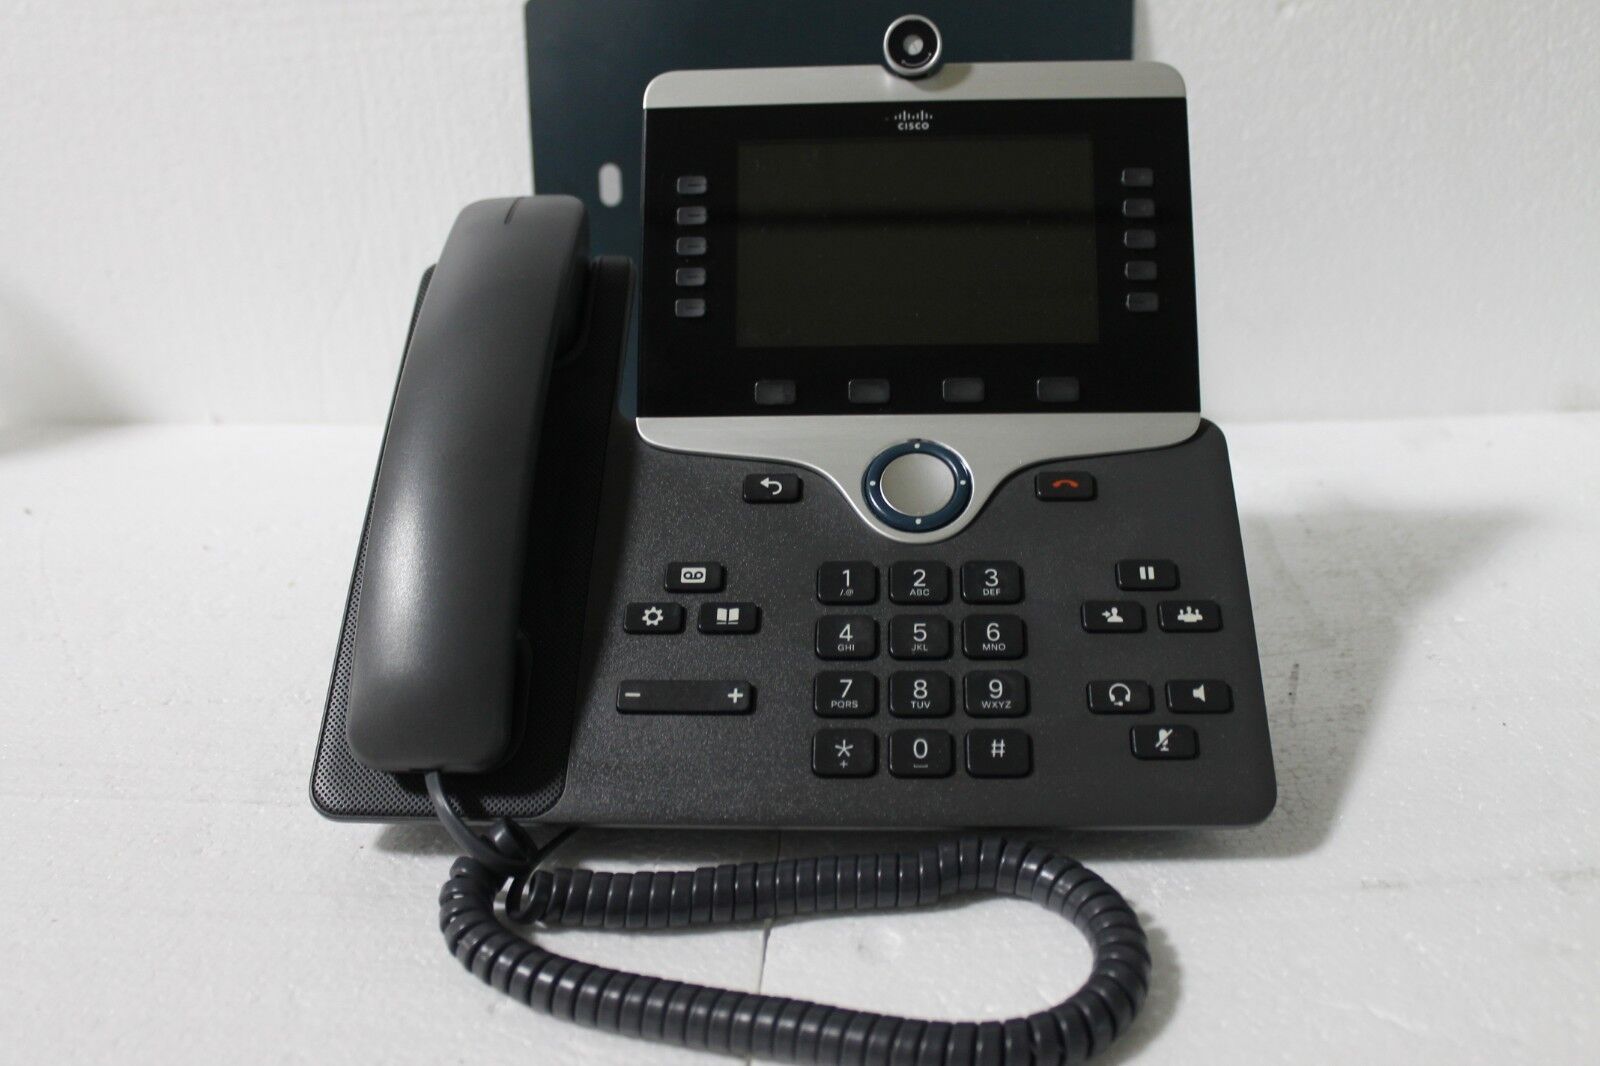 Cisco 8800 Ser. CP-8845-K9 Unified IP Endpoint VoIP Video Phone w Camera & Stand